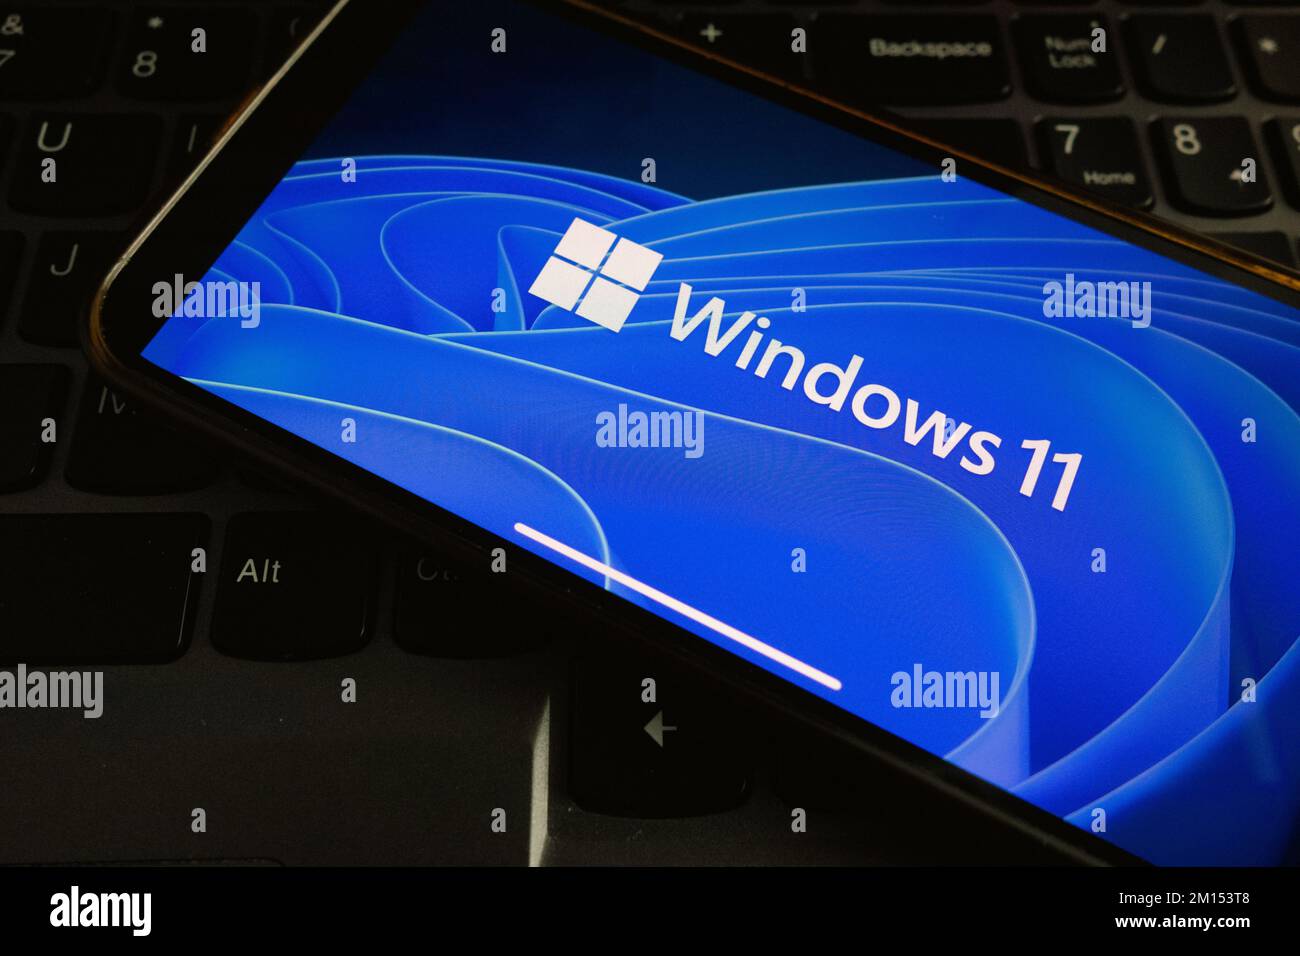 KONSKIE, POLAND - September 17, 2022: Windows 11 logo displayed on smartphone screen in the office. Windows 11 is the latest major release of Microsof Stock Photo